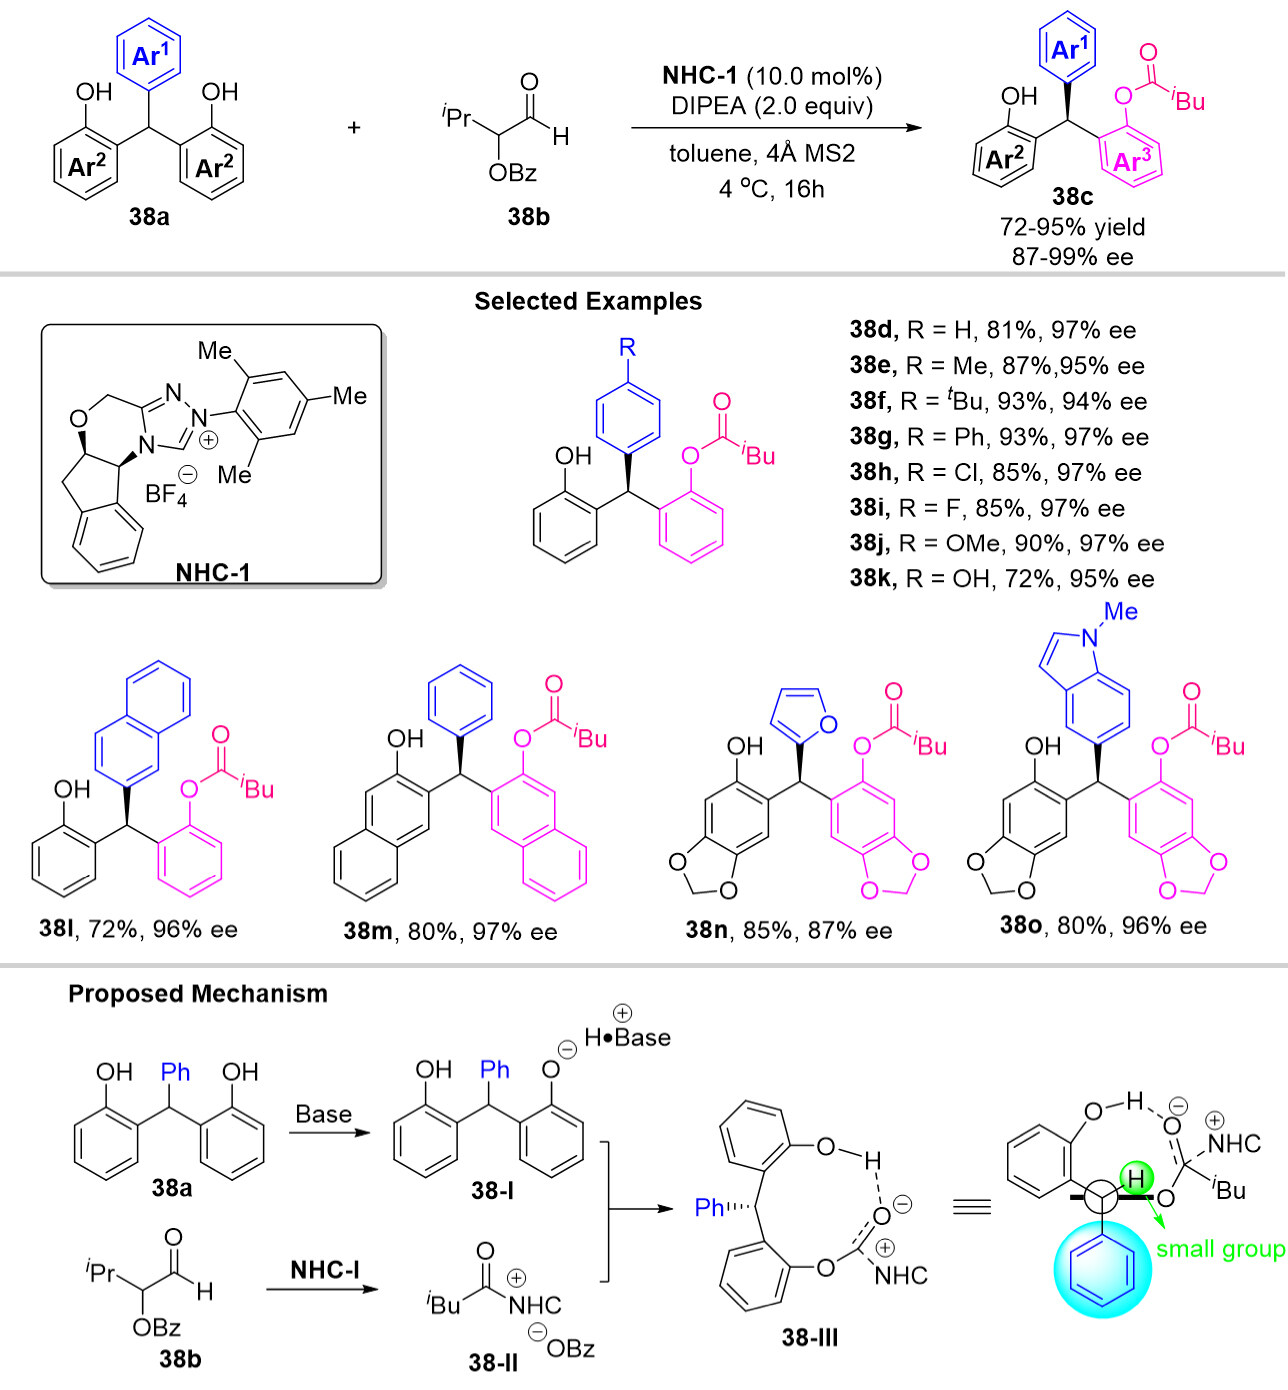 The recent advances in the contribution of chiral triarylmethanes and tetraarylmethanes with organocatalysts